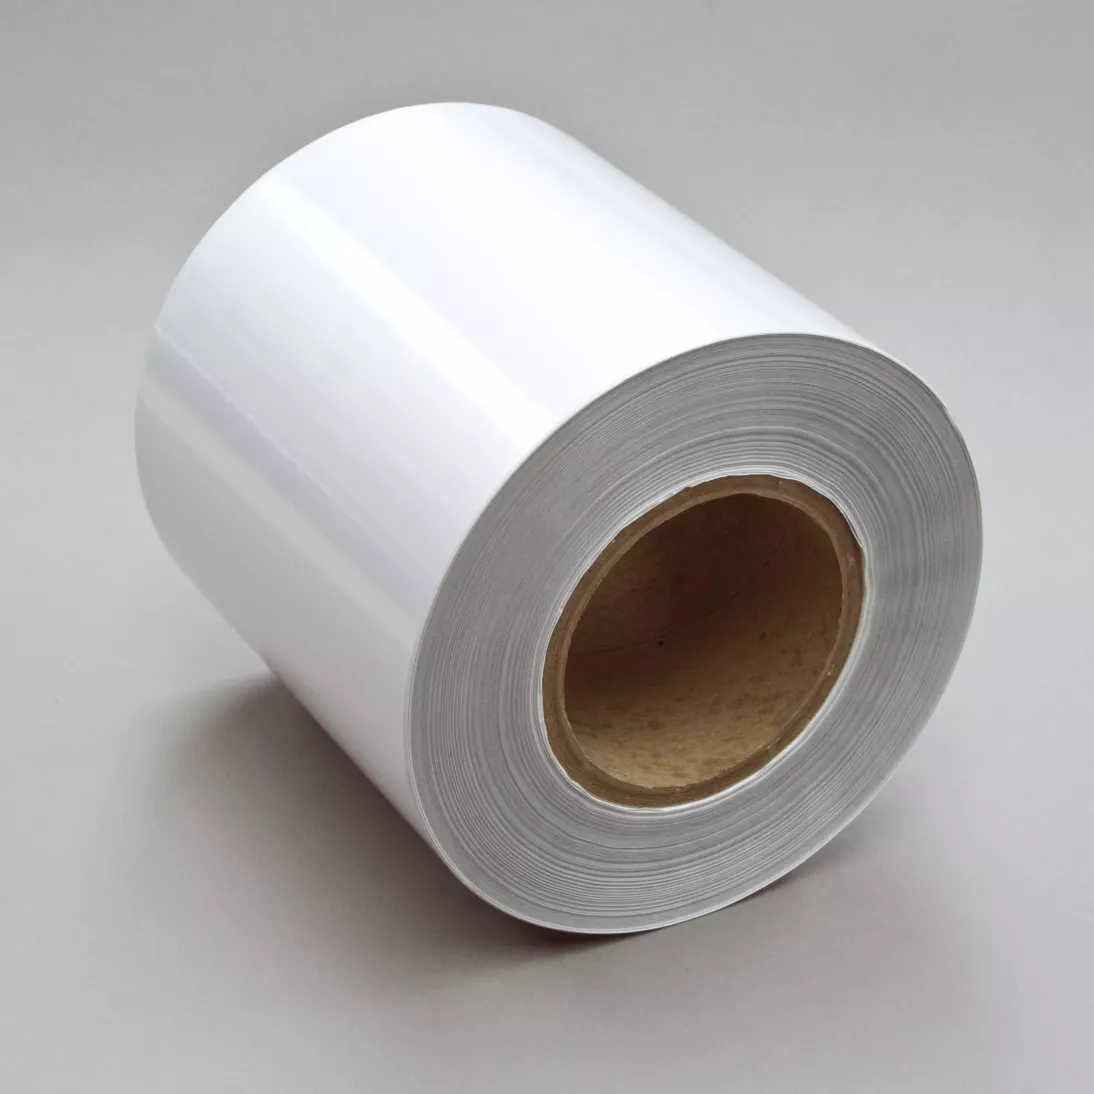 3M™ Thermal Transfer Label Material 7875, Platinum Polyester Gloss, 6 in
x 1668 ft, 1 roll per case